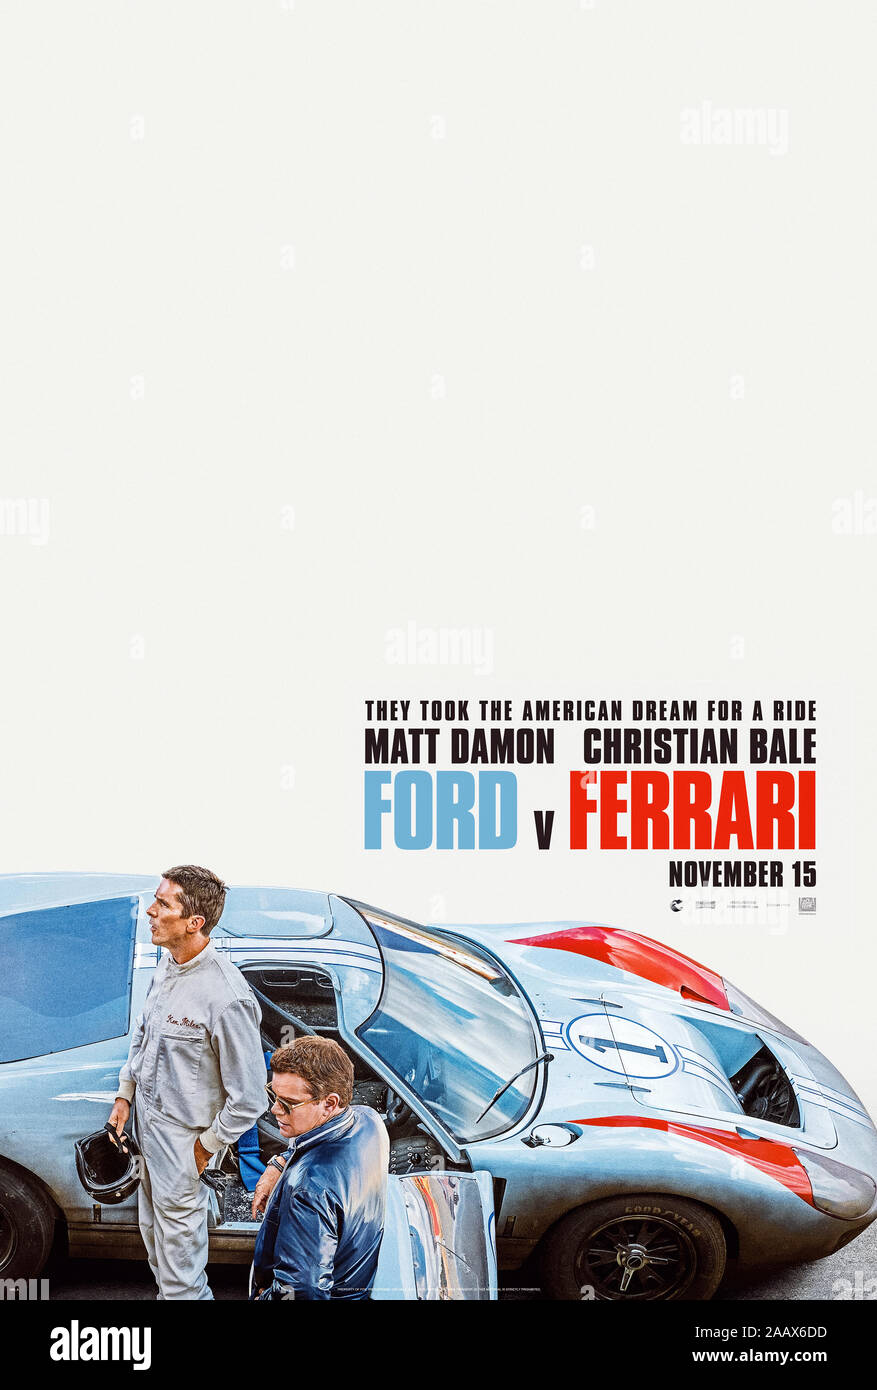 Ford v Ferrari (2019) directed by James Mangold and starring Matt Damon, Christian Bale, Jon Bernthal and Caitriona Balfe. True story of car designer Carroll Shelby and driver Ken Miles’ personal battle to build a car for Ford to challenge the dominance of Ferrari at Le Mans for the 1966 24 hour race. Stock Photo